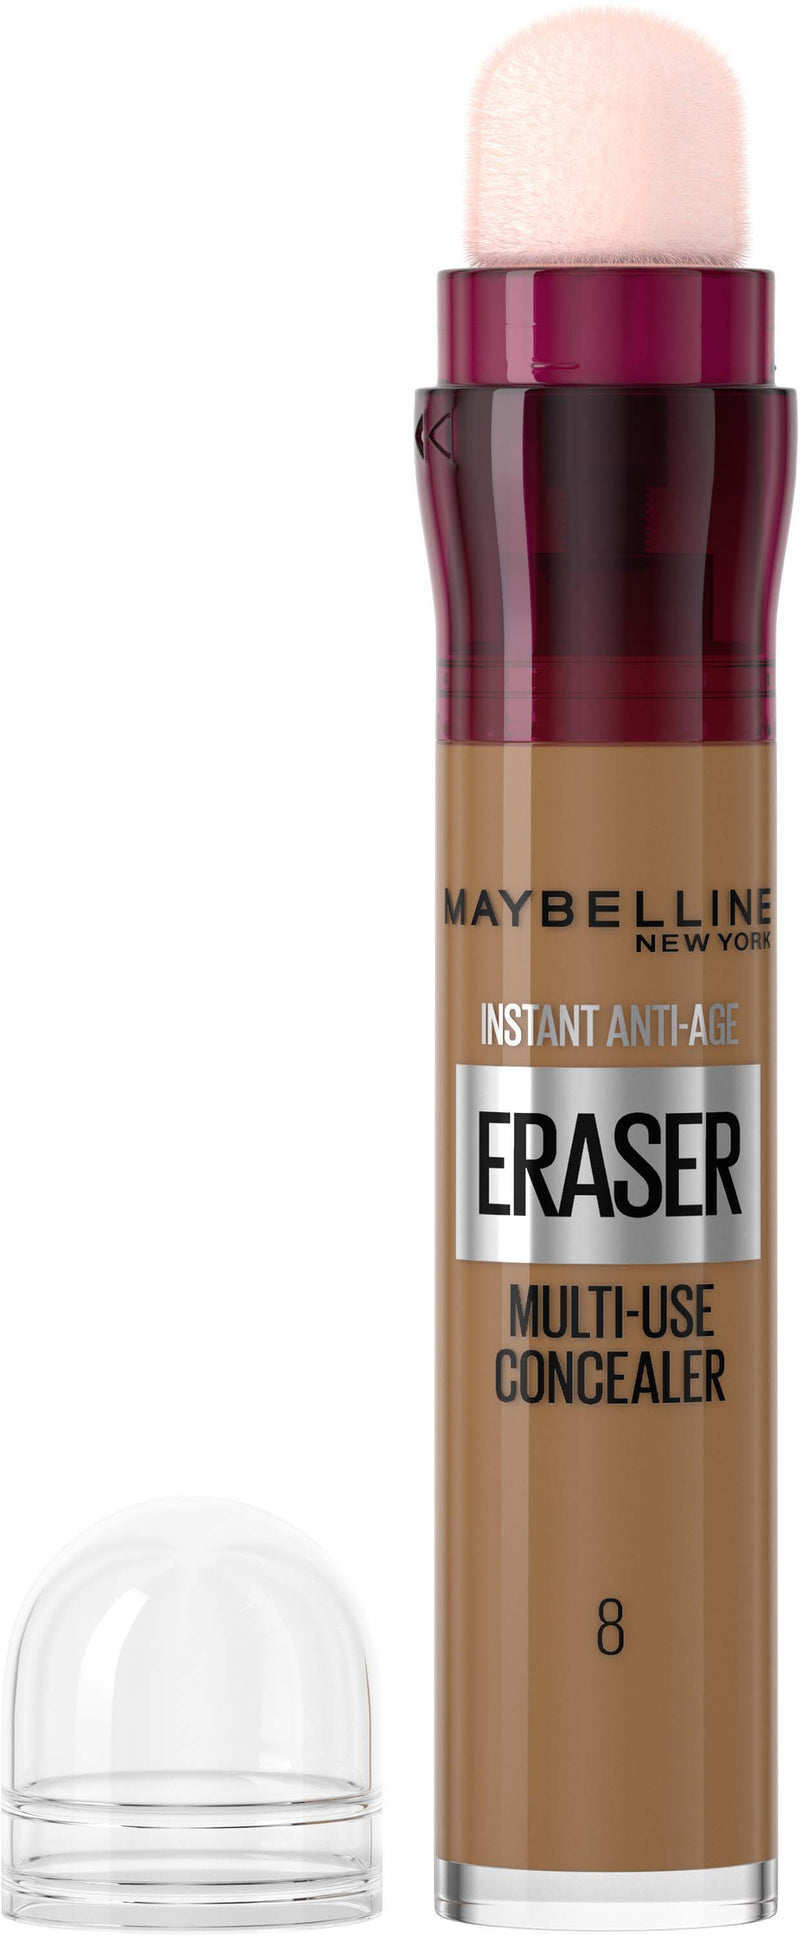 Maybelline New York Instant Anti-Age Eraser Multi-Use Concealer 08 Buff